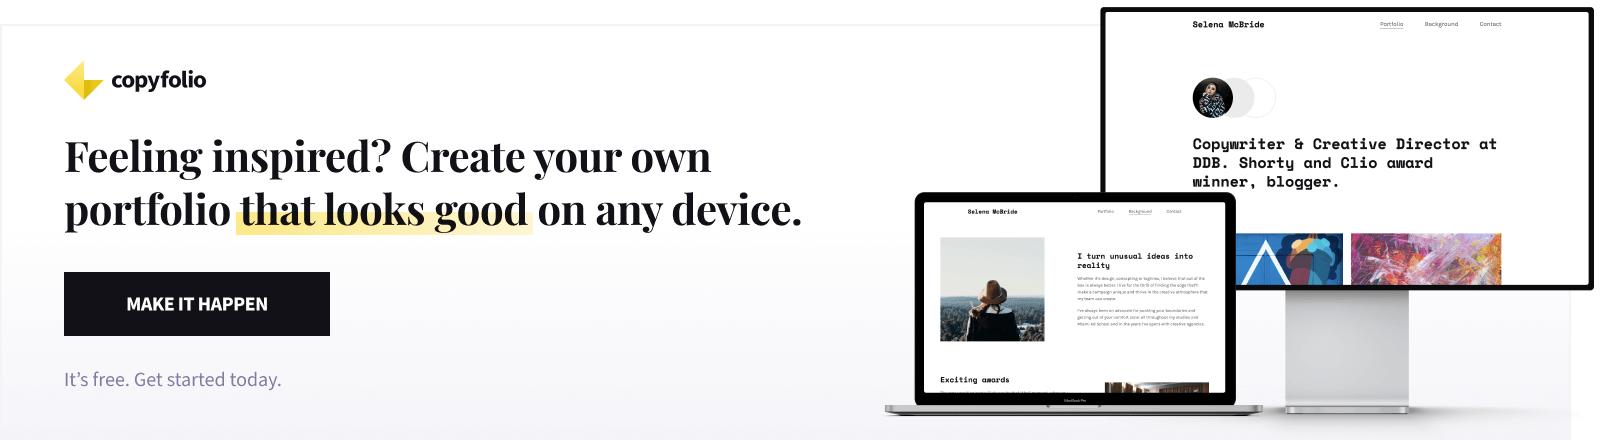 Feeling inspired? Create your own portfolio that looks good on any device.